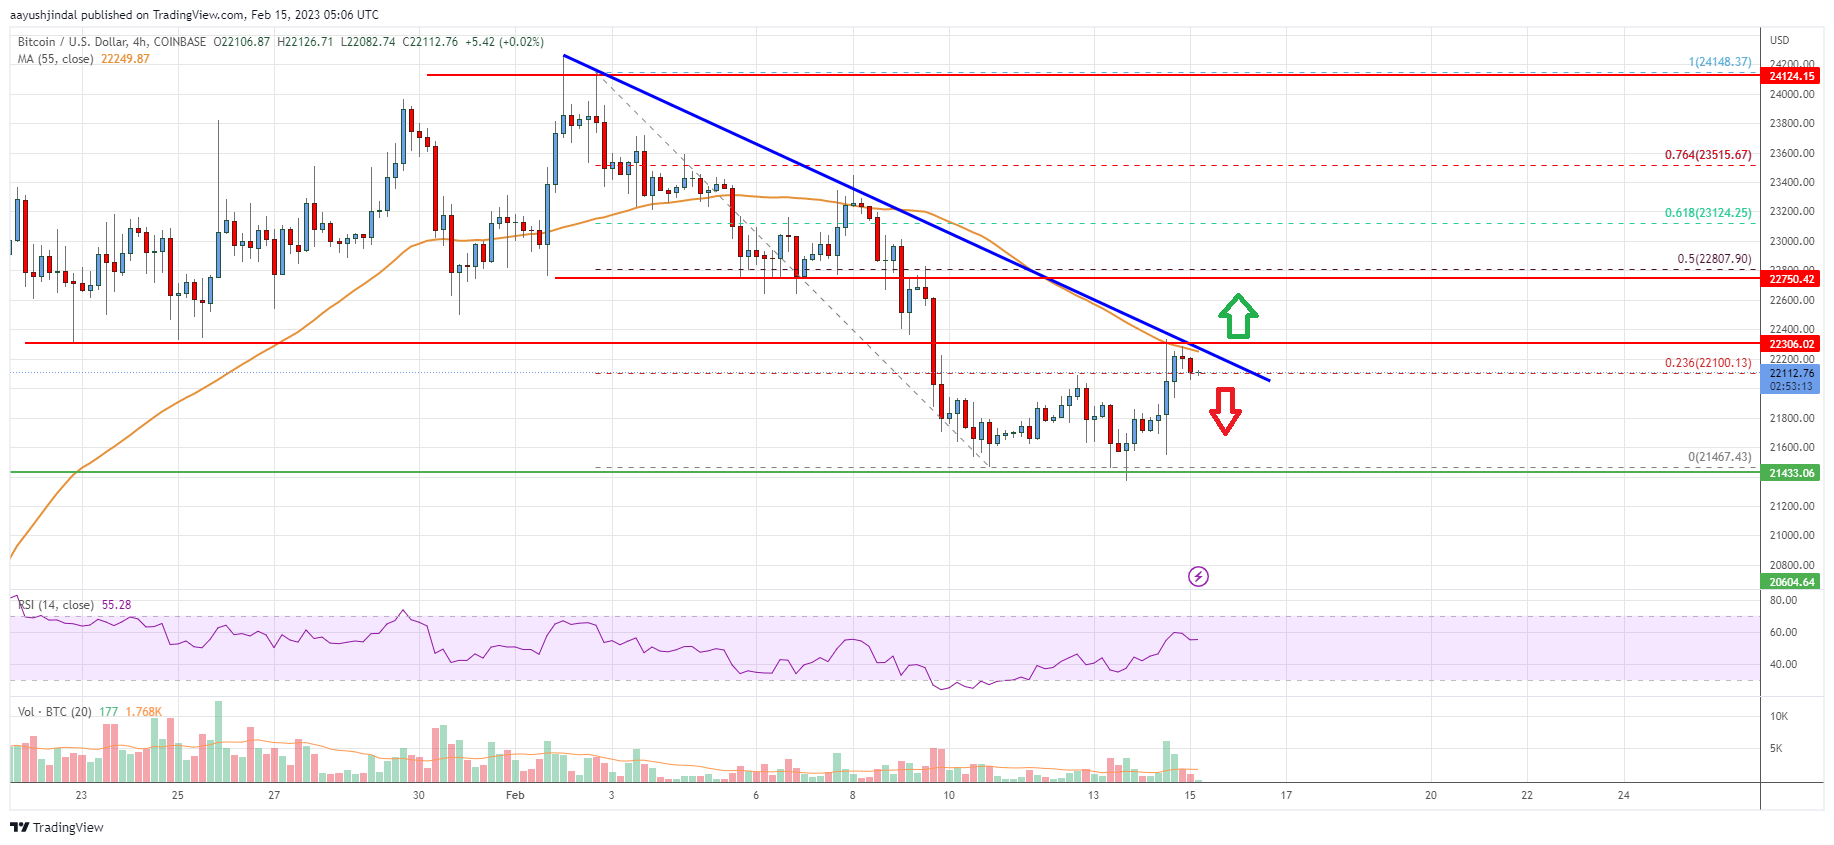 Bitcoin Price Analysis: BTC At Risk of Another Decline